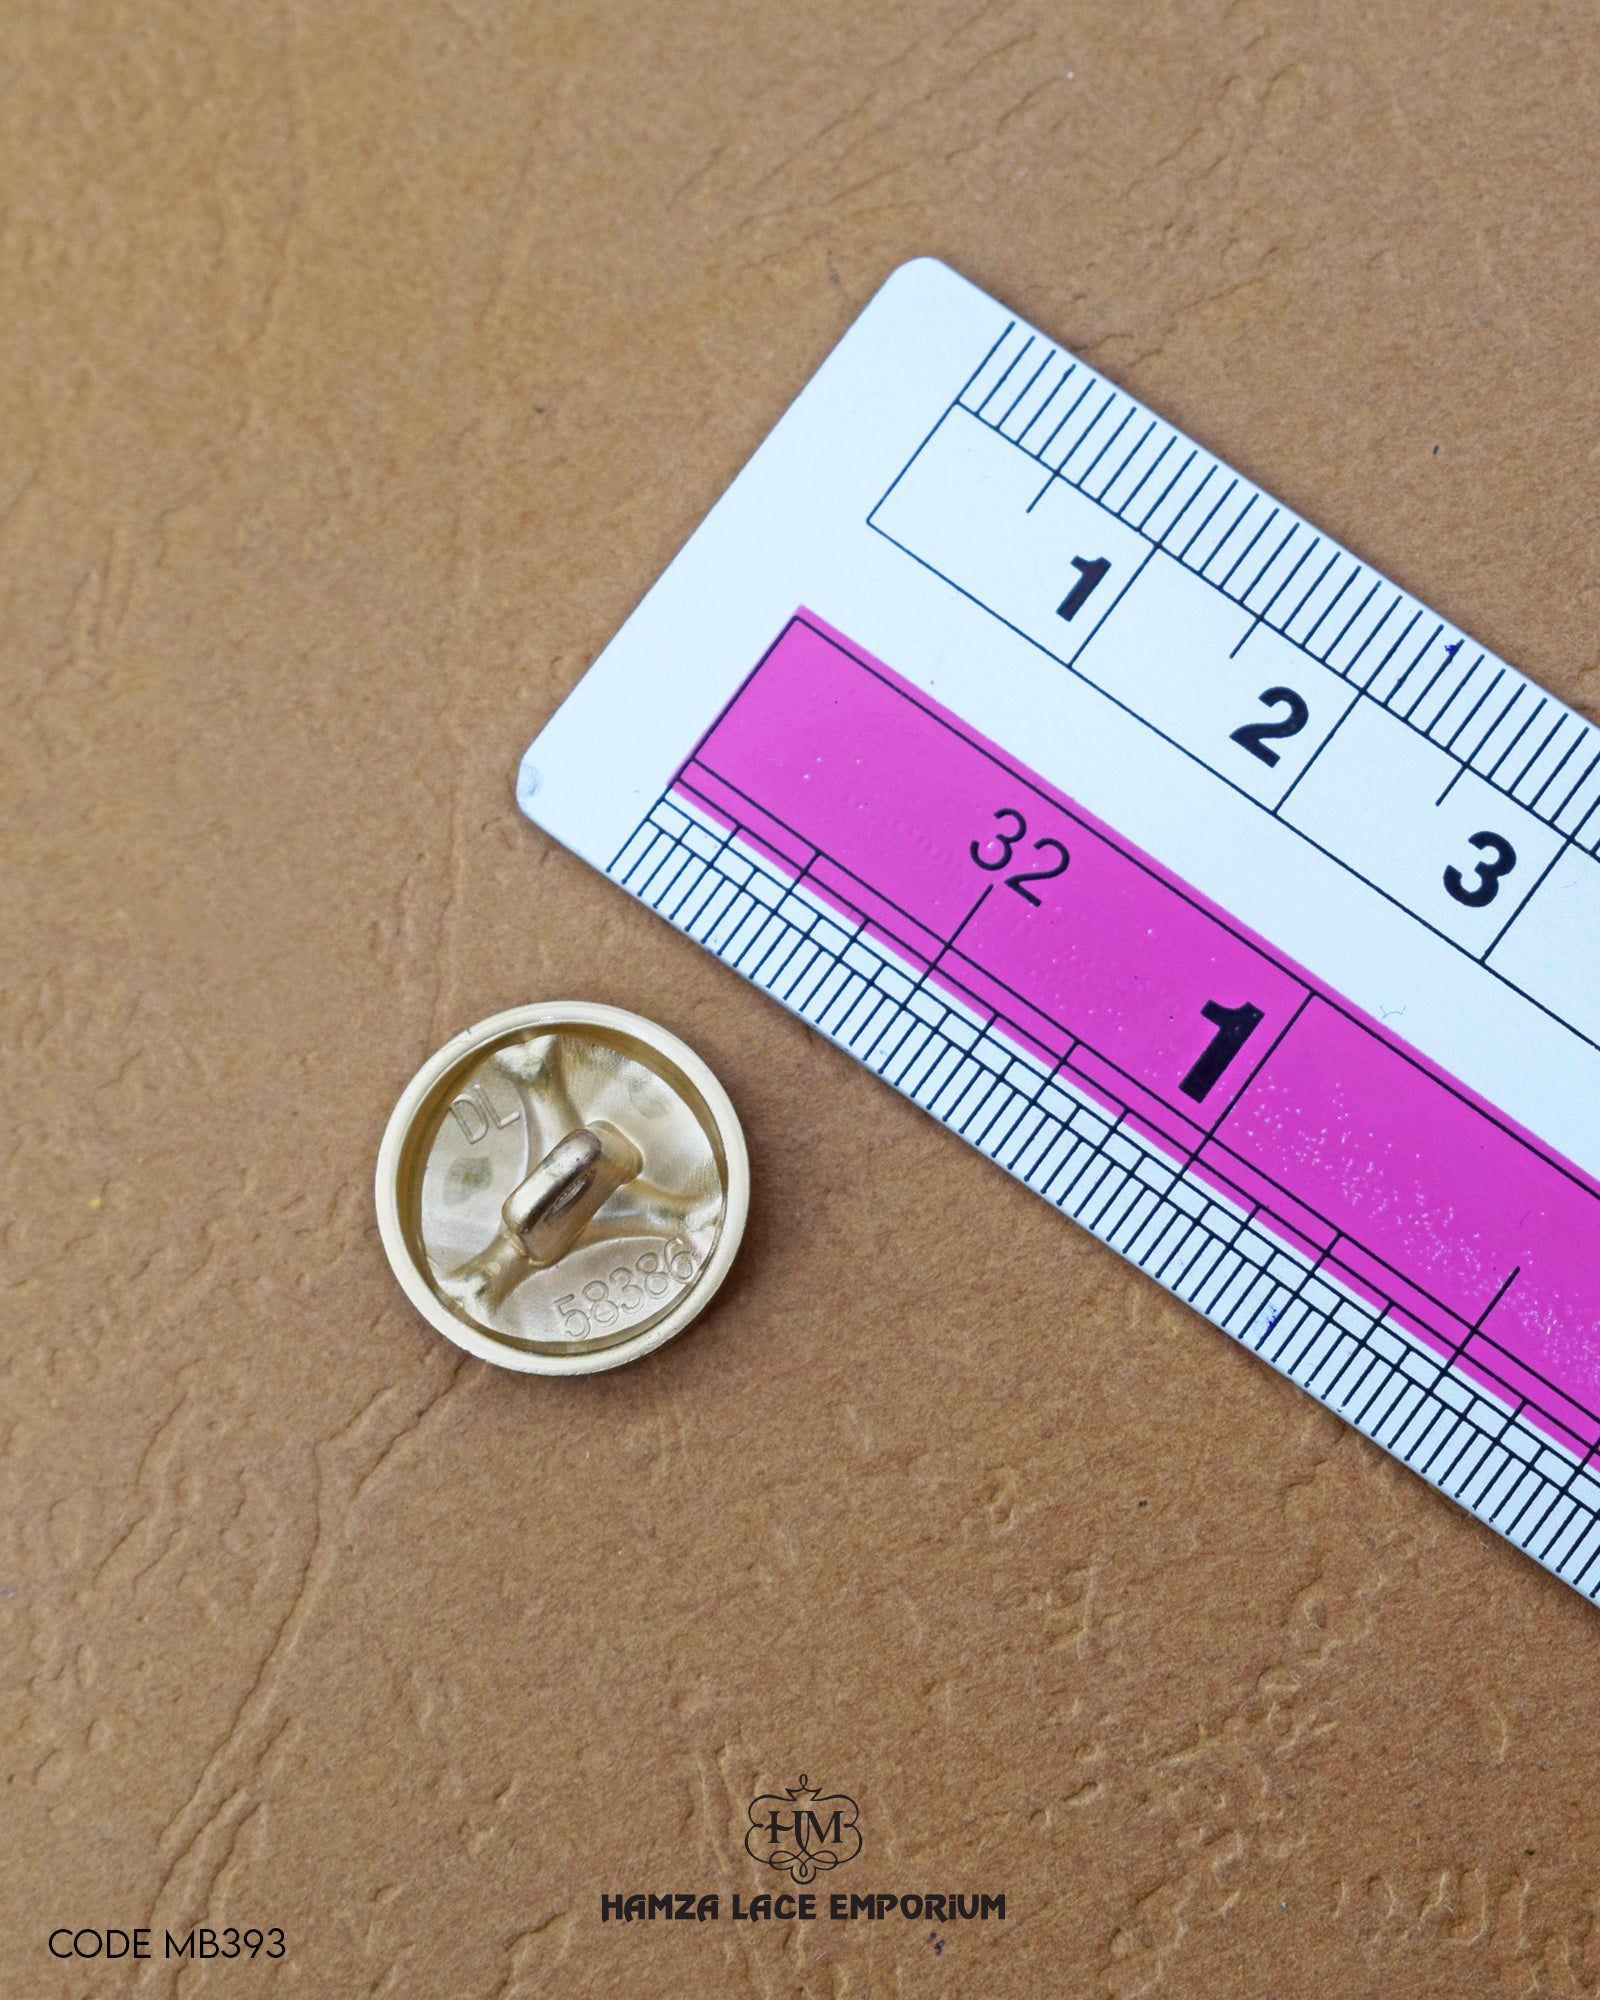 Size of the 'Flower Design Metal Button MB393' is given with the help of a ruler